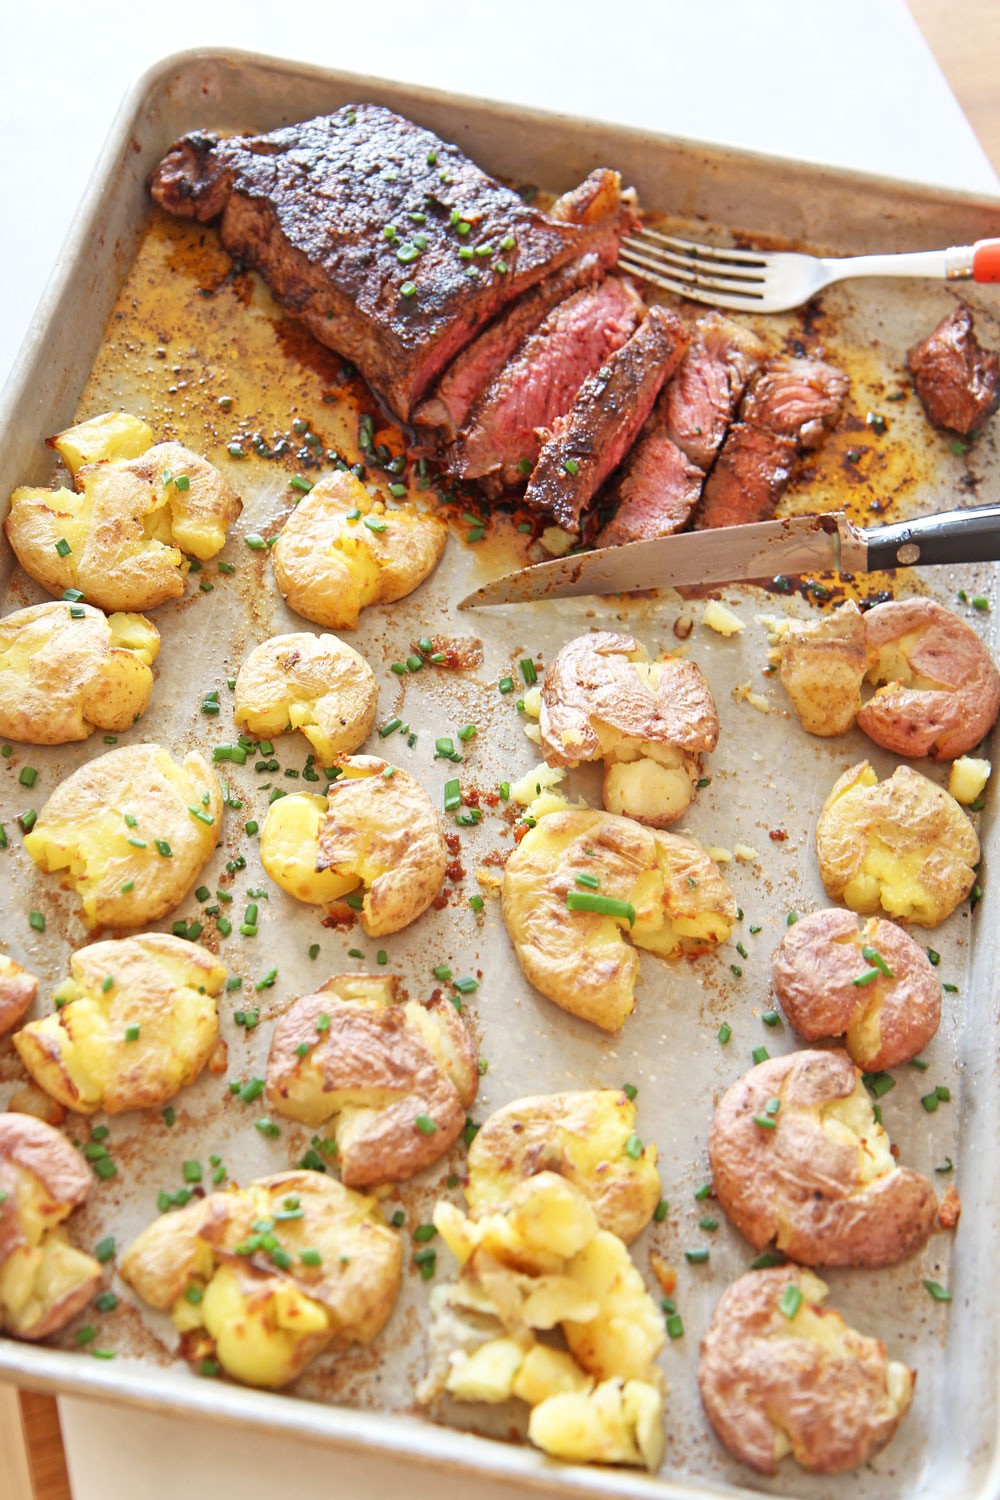 Sheet Pan Steak and Potatoes Recipe. Grab a NY Strip steak, chili seasoning, and lots of Yukon gold potatoes boiled in chicken broth. Easy dinner in less the 30 minutes. Happy weeknight cooking. www.ChopHappy.com #steakdinner #sheetpandinner